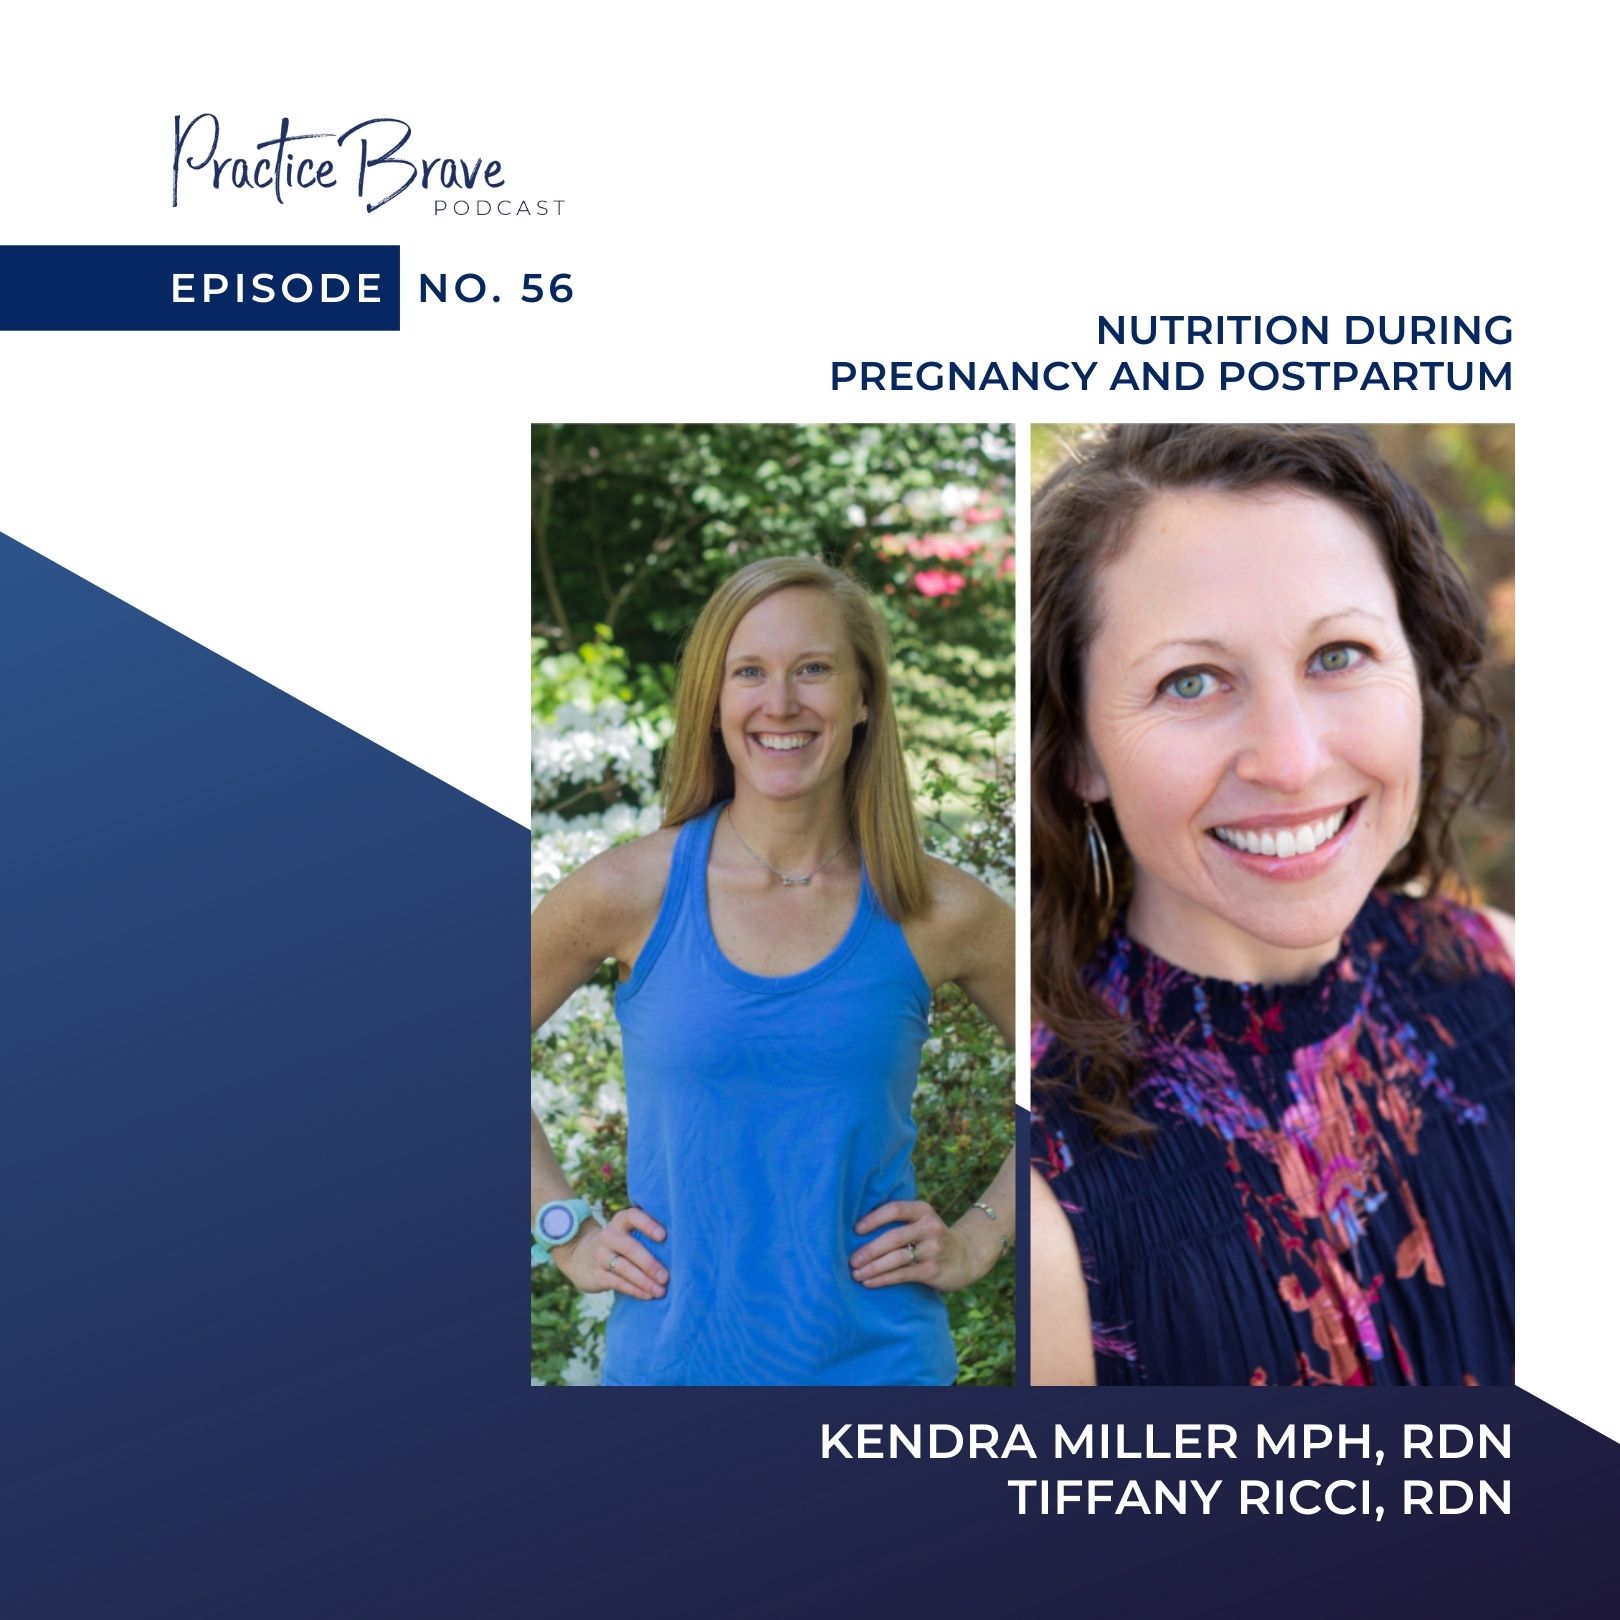 Episode 56: Nutrition During Pregnancy and Postpartum With Kendra Miller and Tiffany Ricci